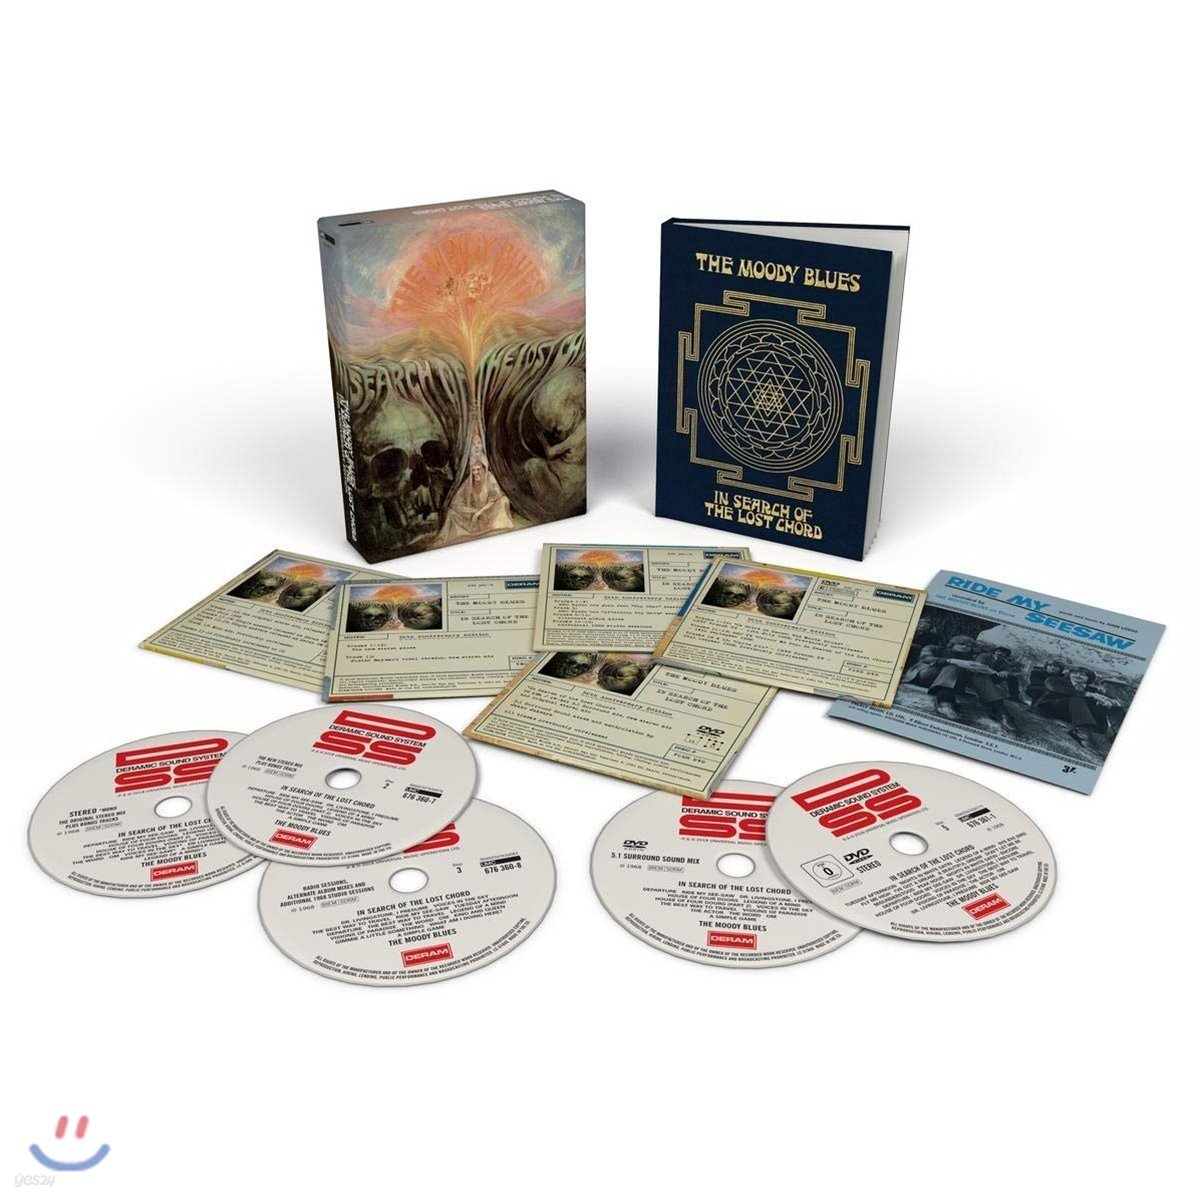 Moody Blues - In Search Of The Lost Chord 무디 블루스 3집 [발매 50주년 기념]